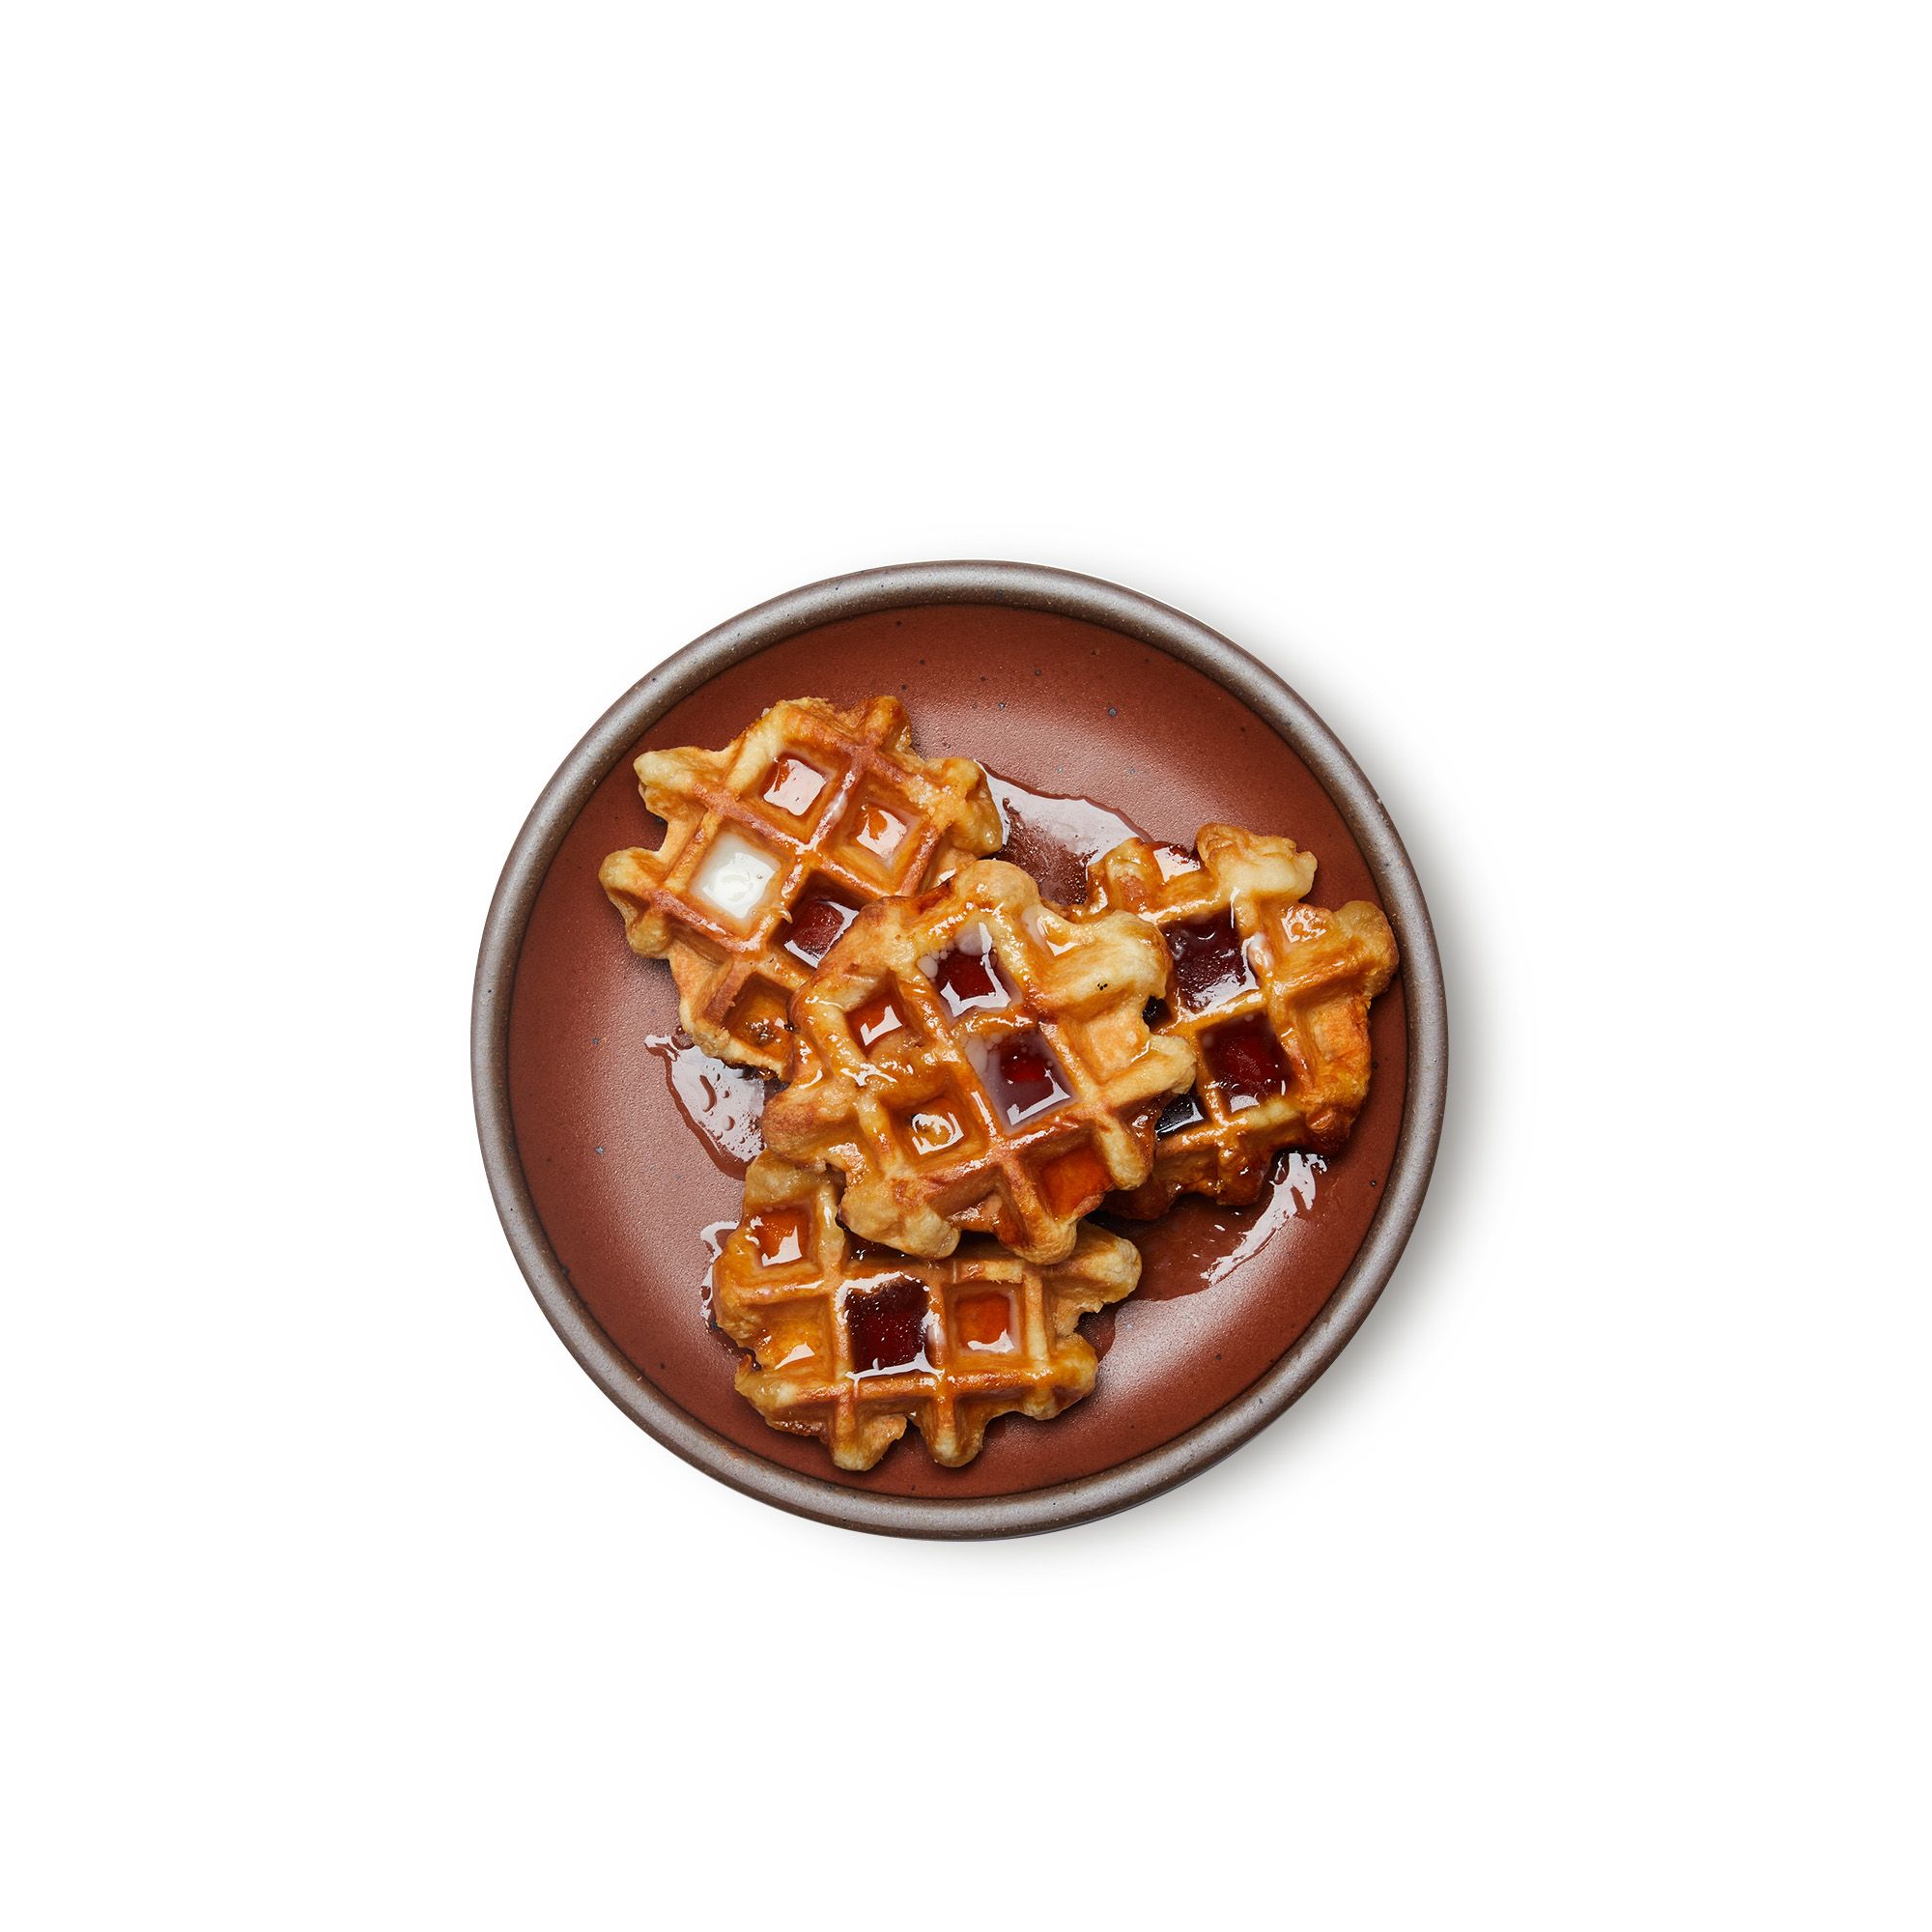 A medium sized ceramic plate in a cool burnt terracotta color featuring iron speckles and an unglazed rim, with waffles and syrup